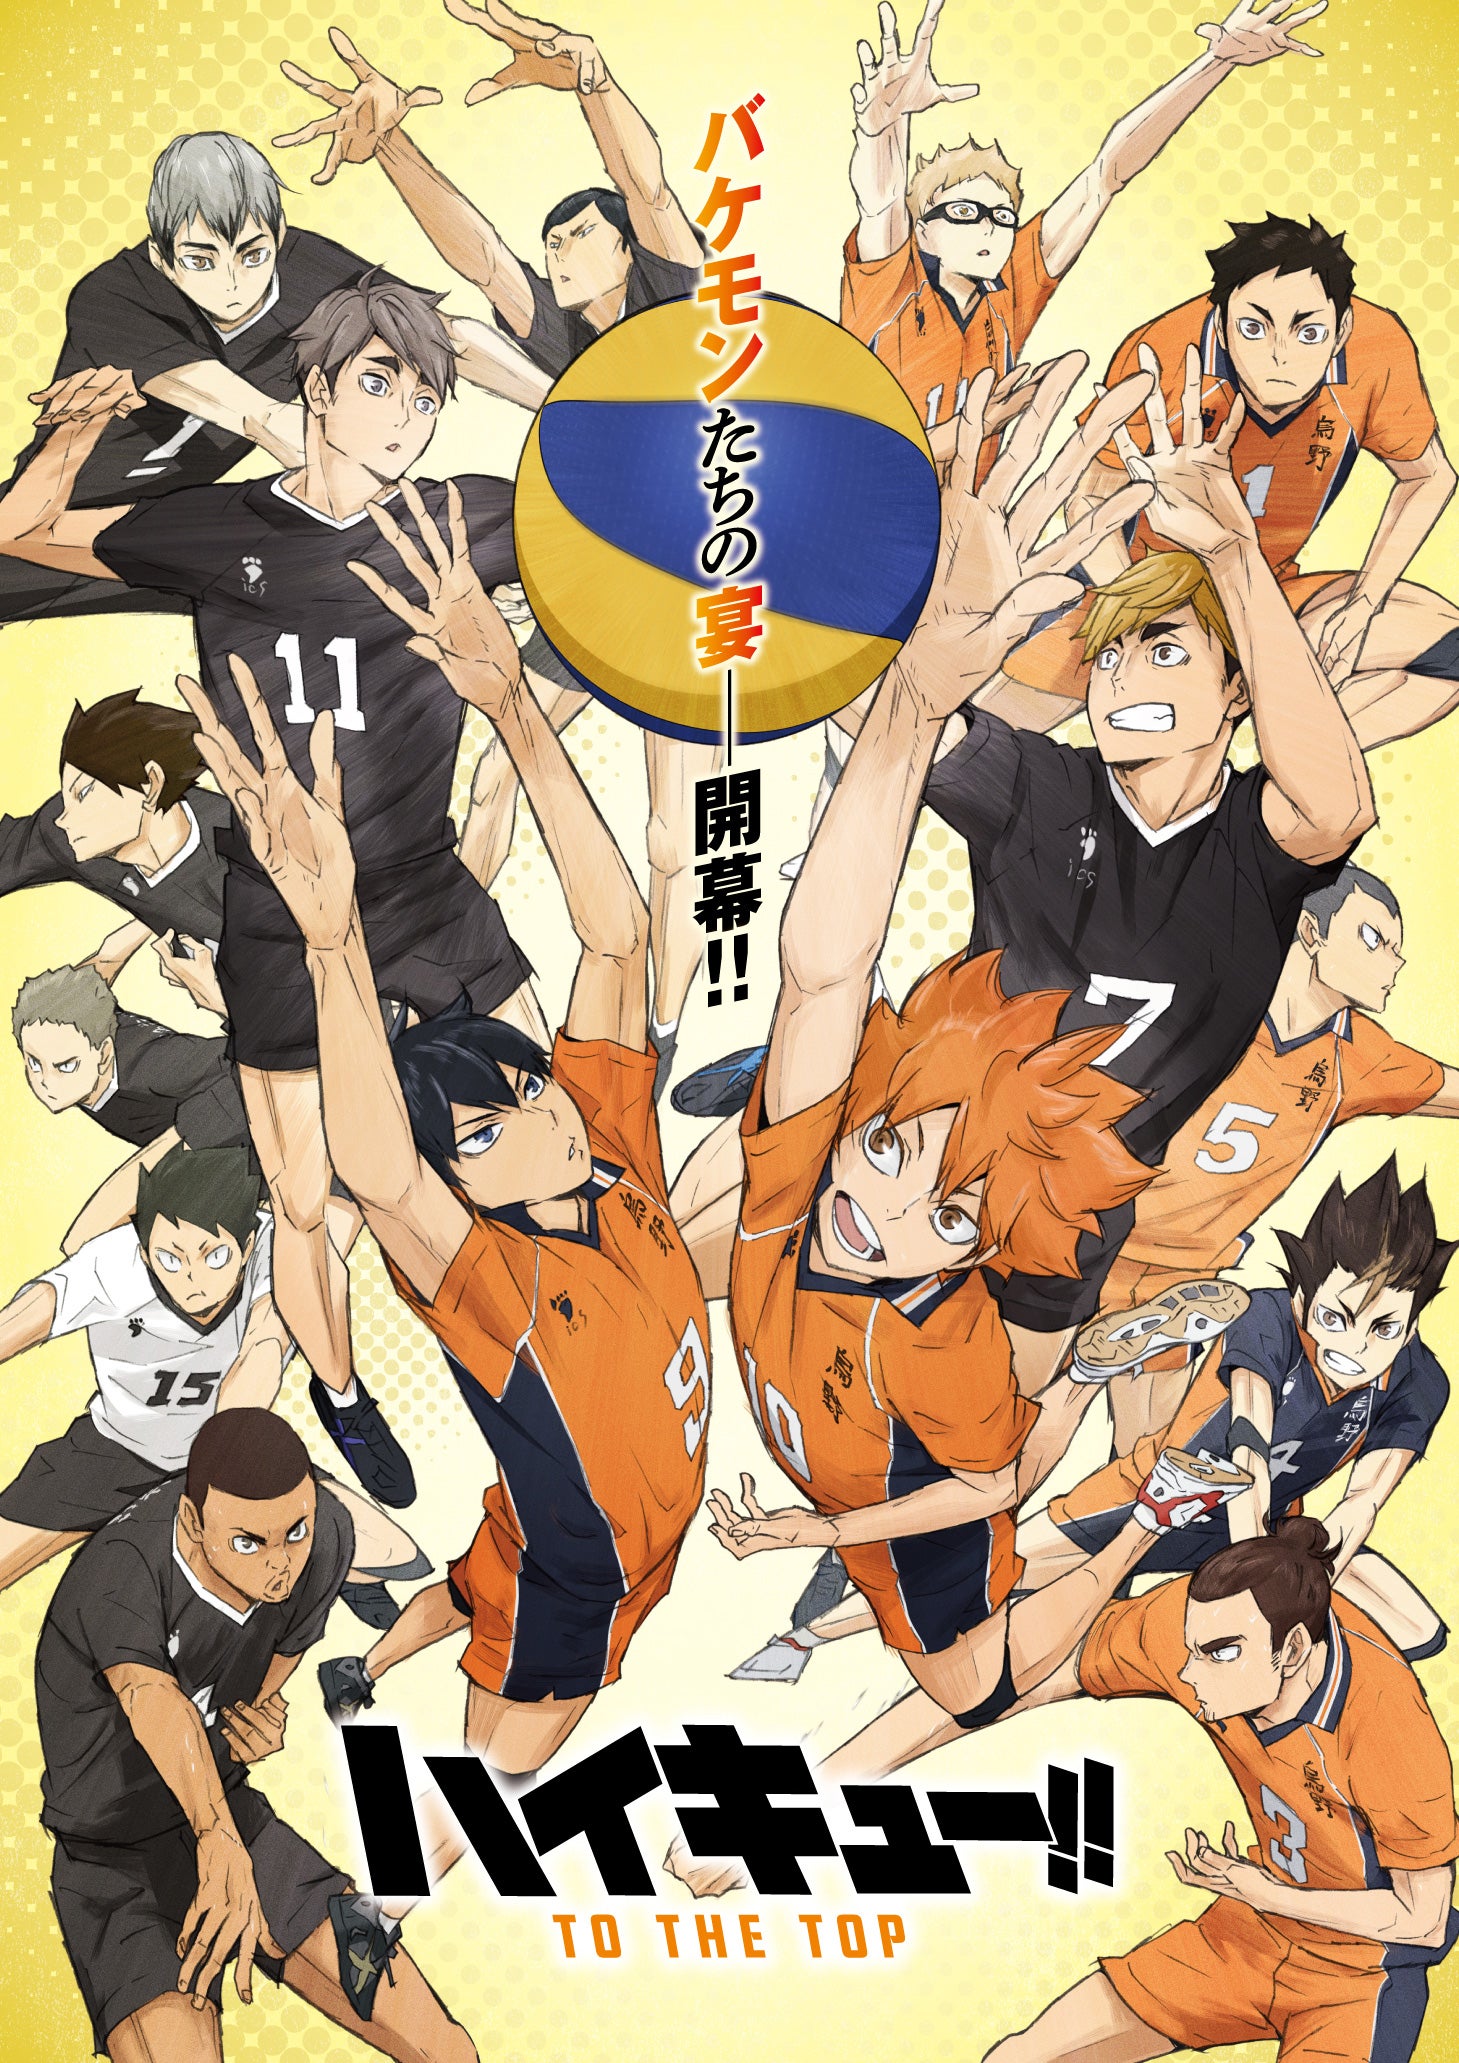 Haikyu!! To The Top anime anden del forsinket grundet COVID-19